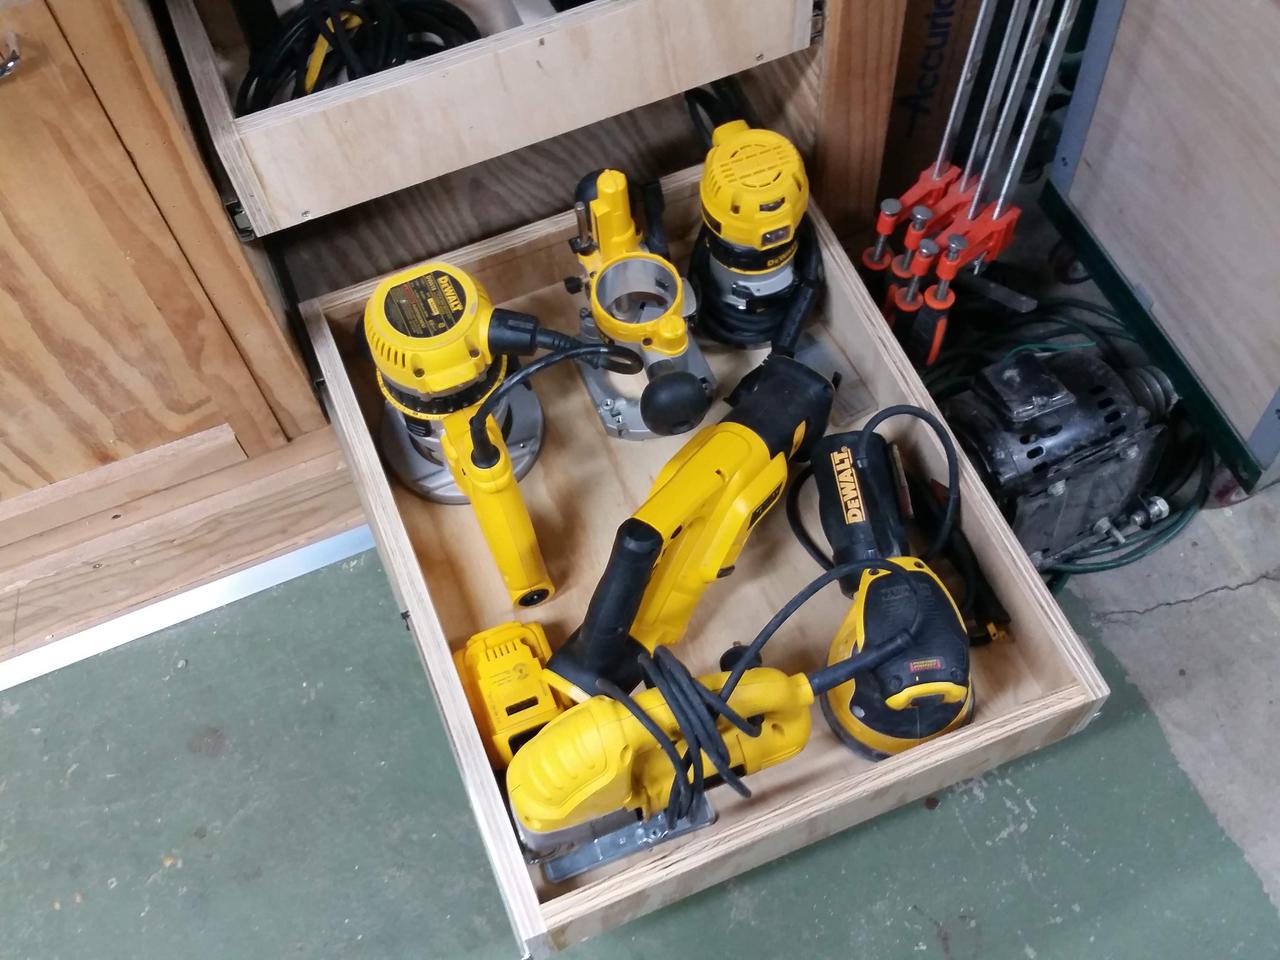 /galleries/Projects/Tool_Organizing_Drawer/20191102_165641.jpg